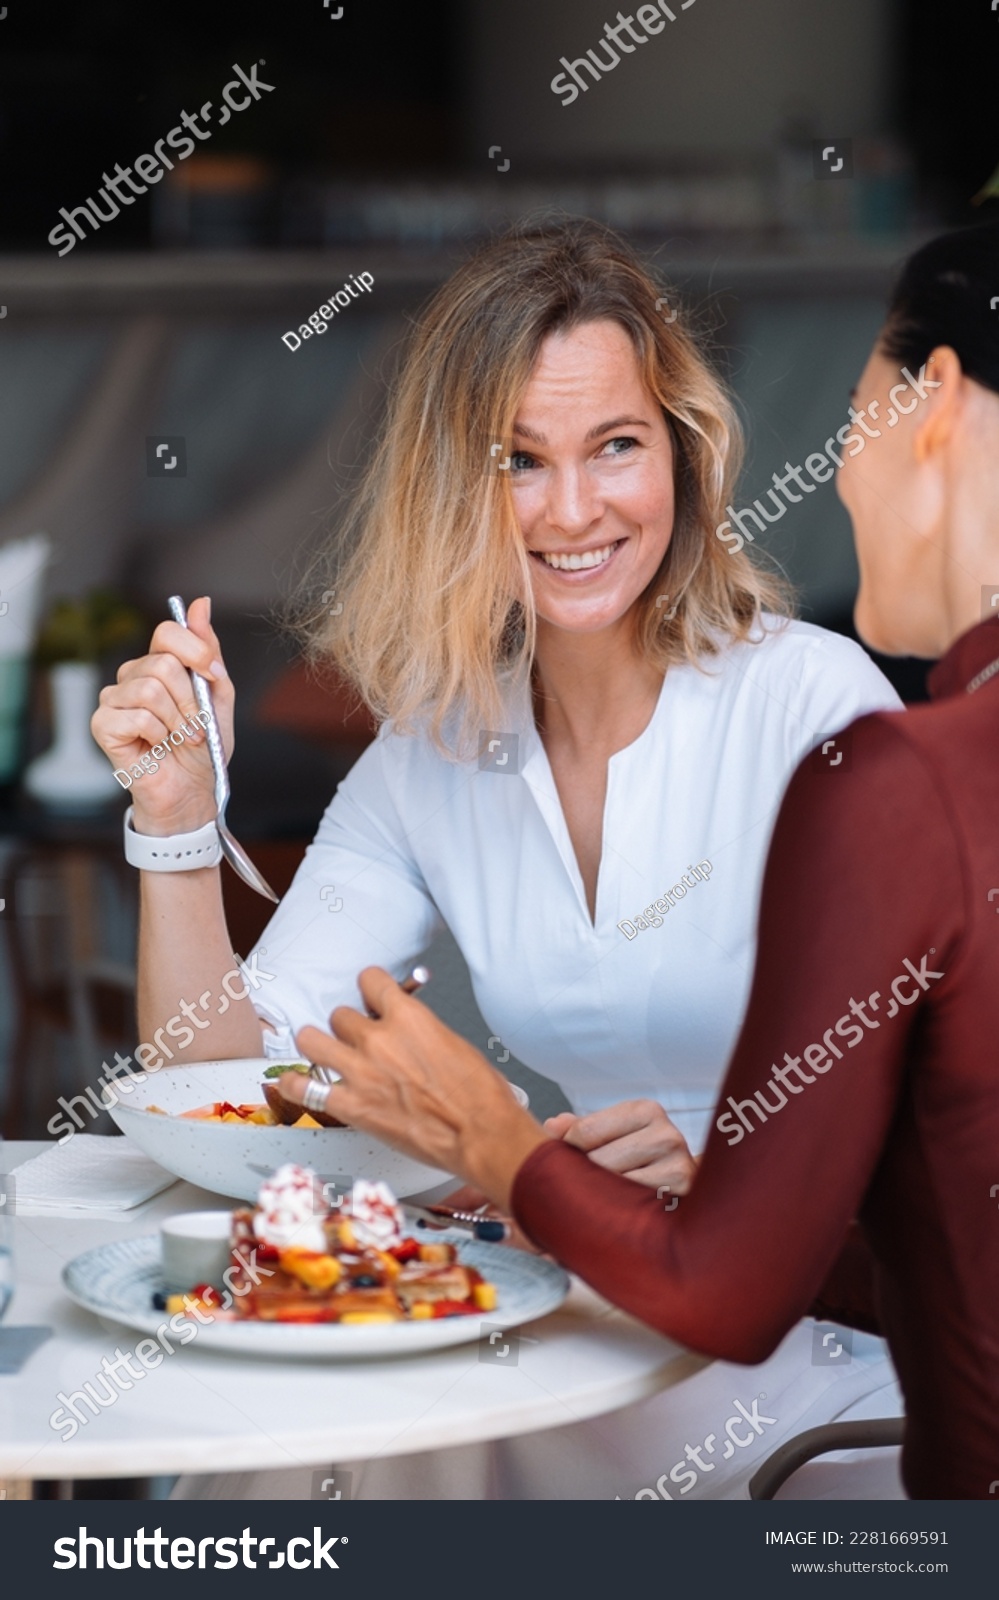 two women eating each other